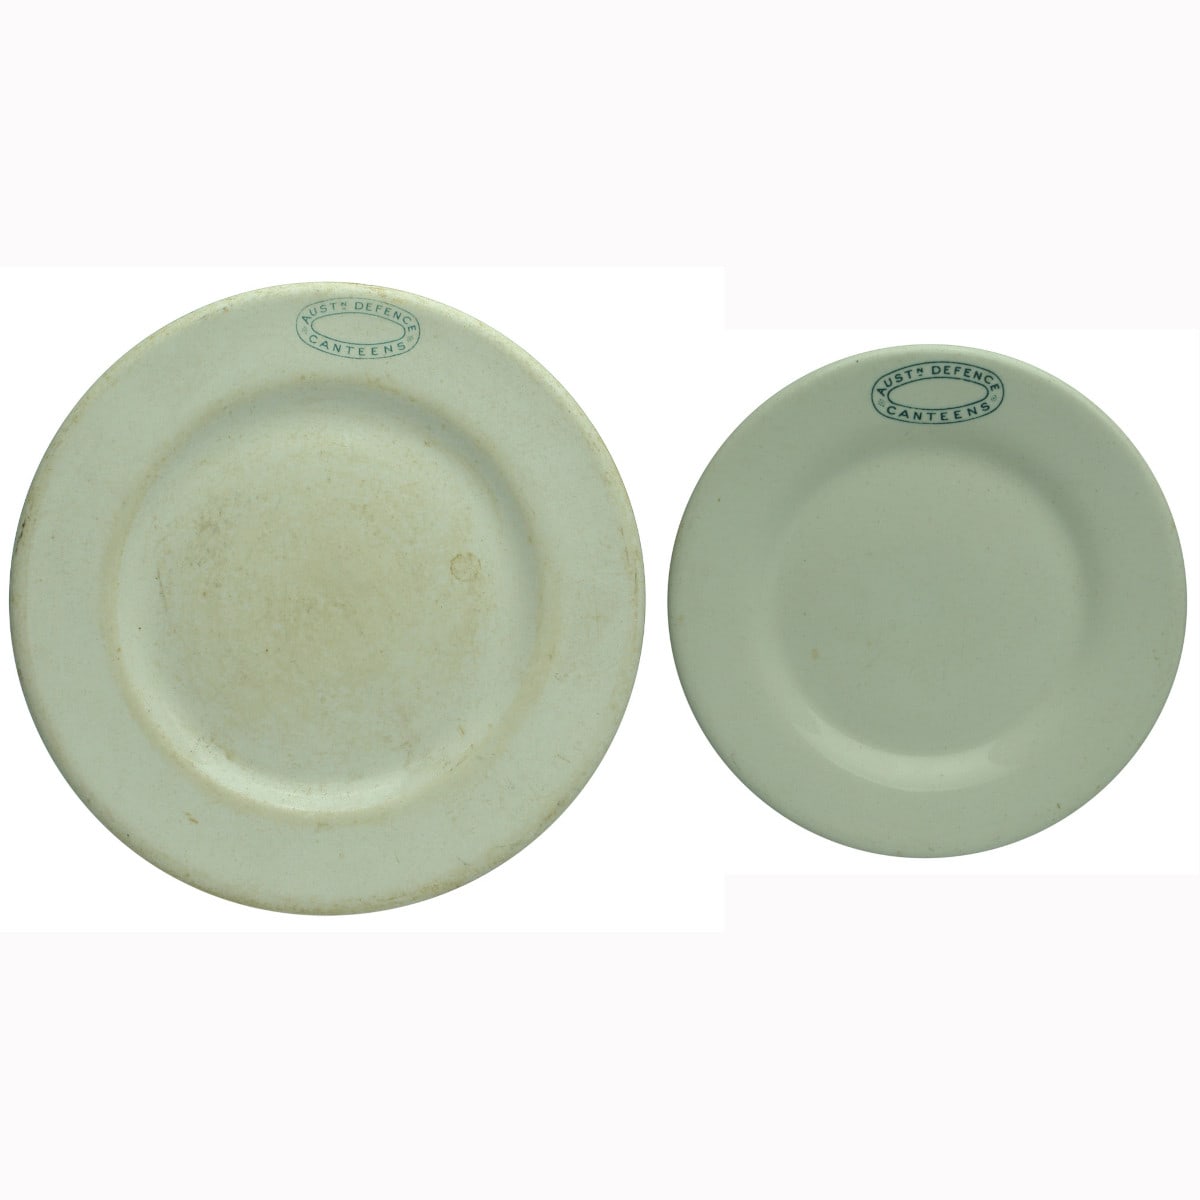 Pair of Australian Defence Canteens plates